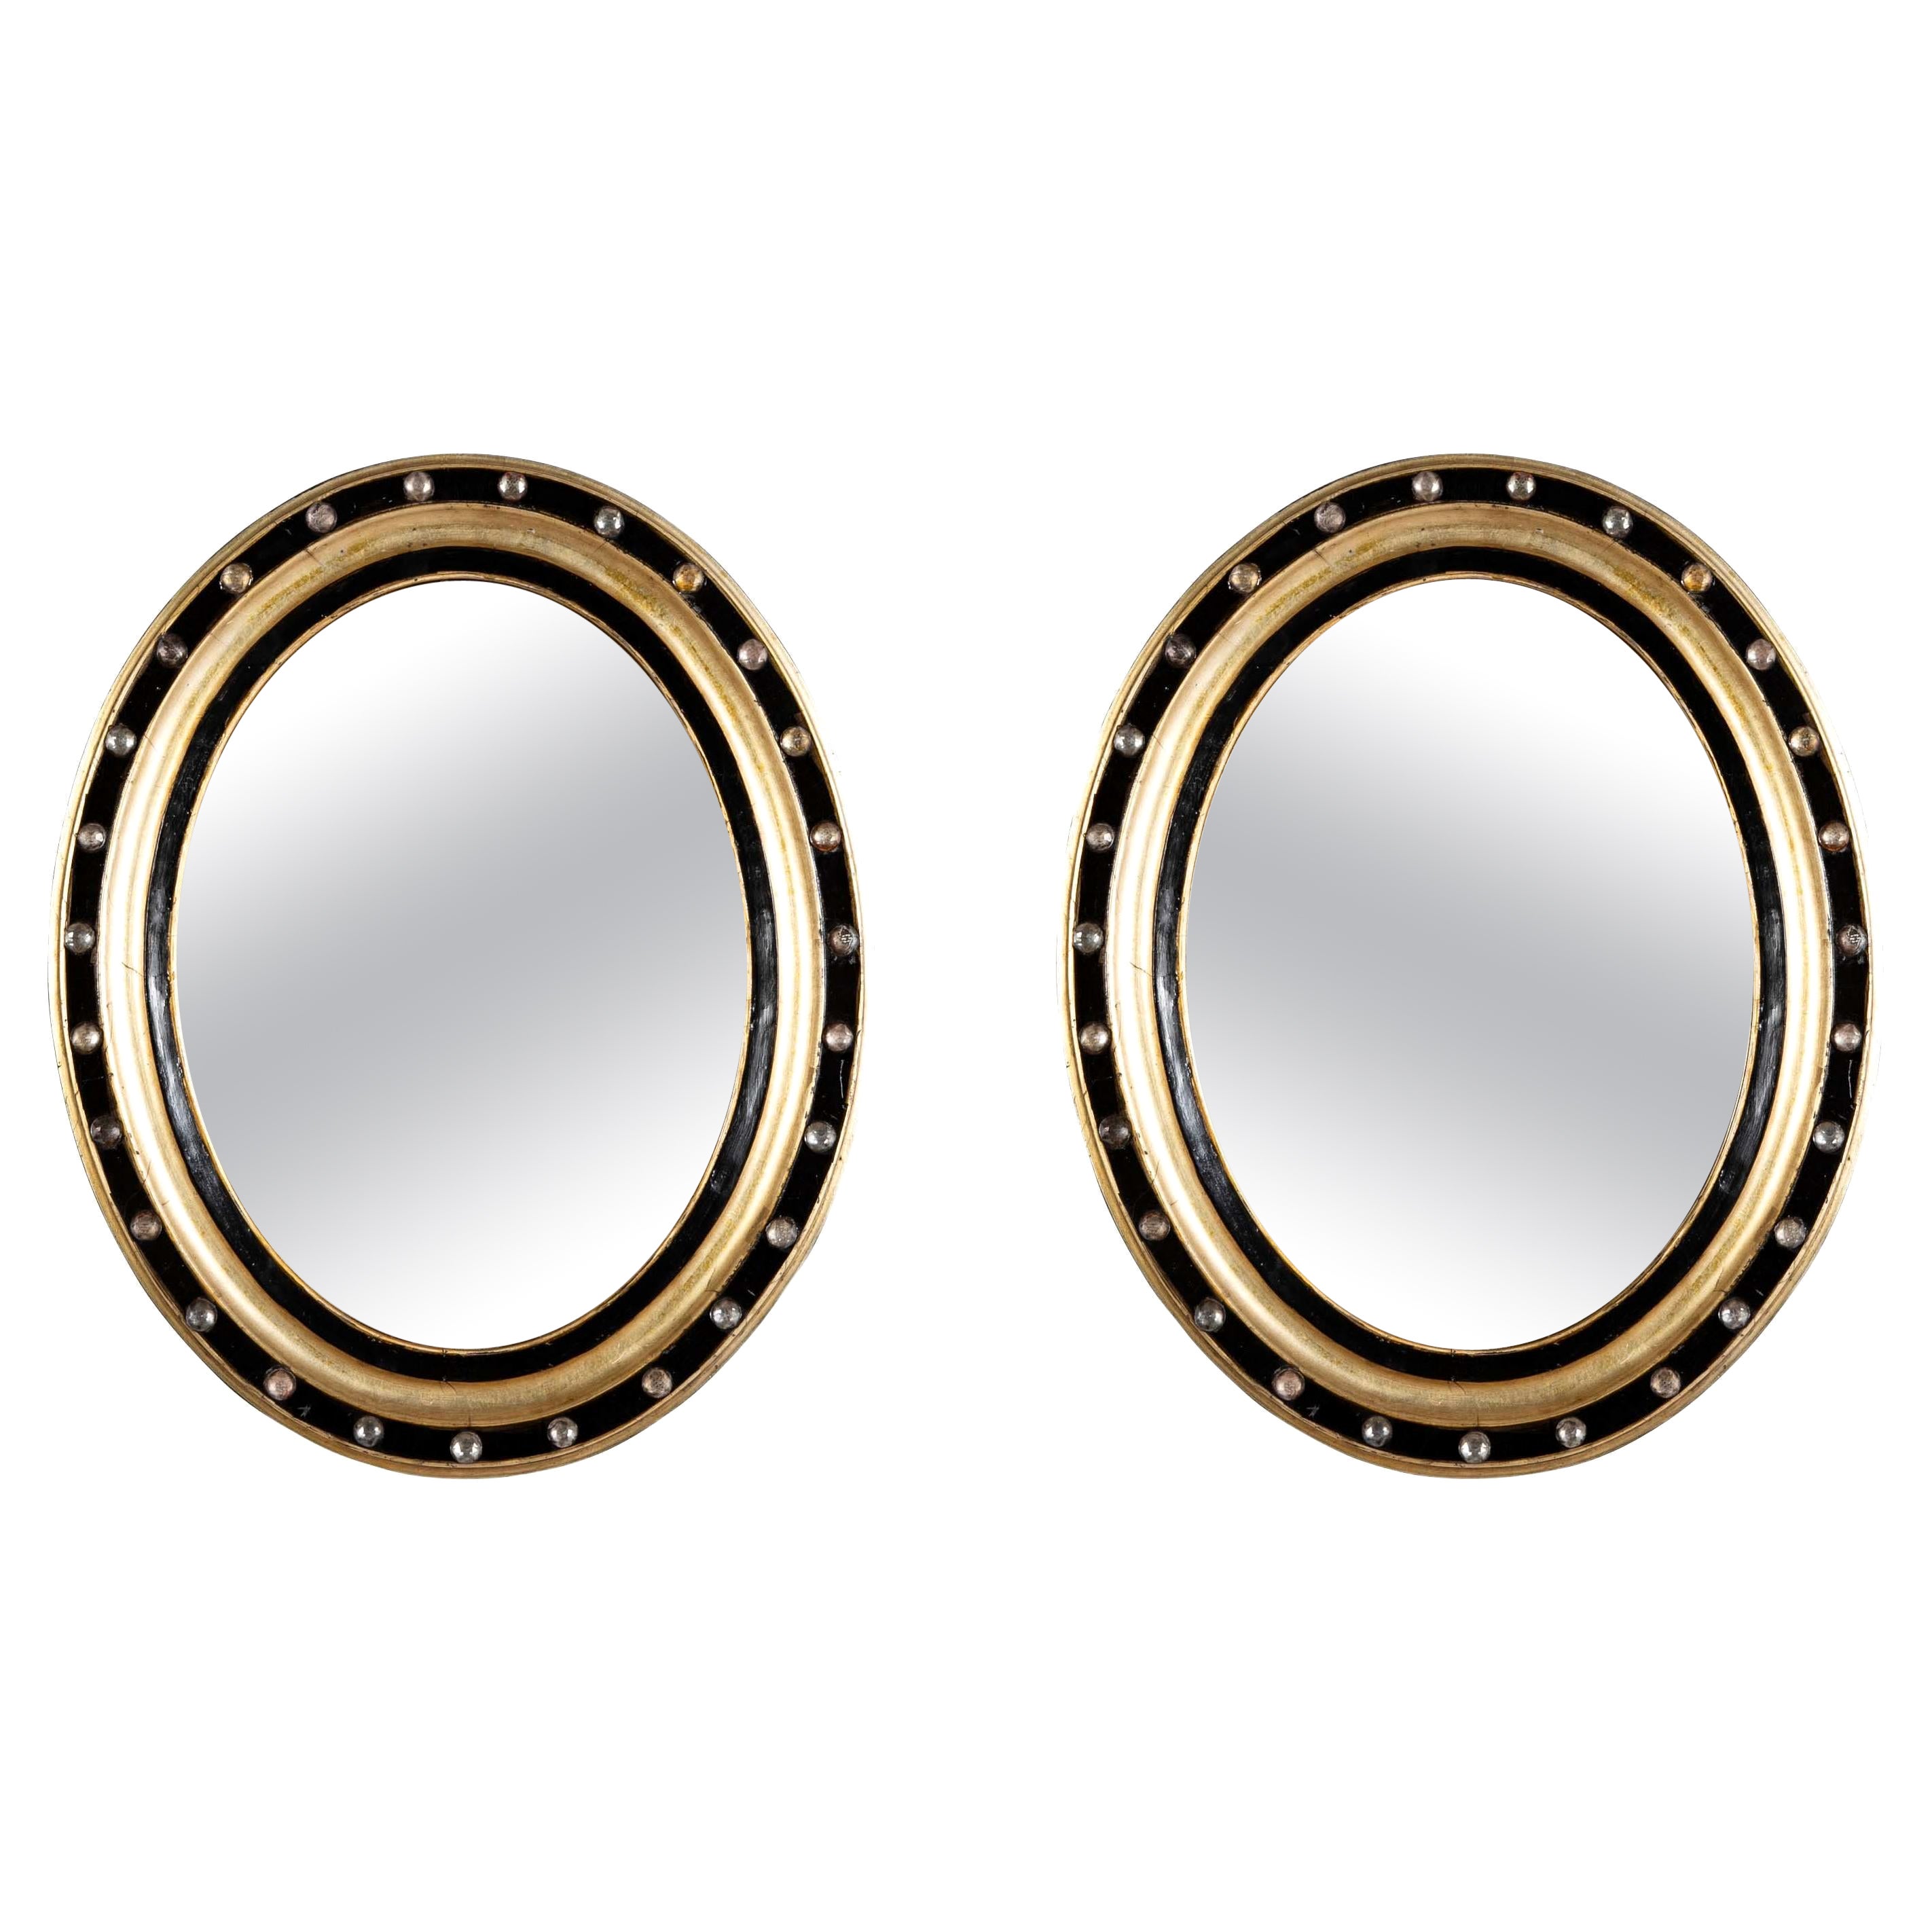 Pair 19th Century Irish Gilt and Ebonized Oval Mirrors With Faceted Crystals For Sale